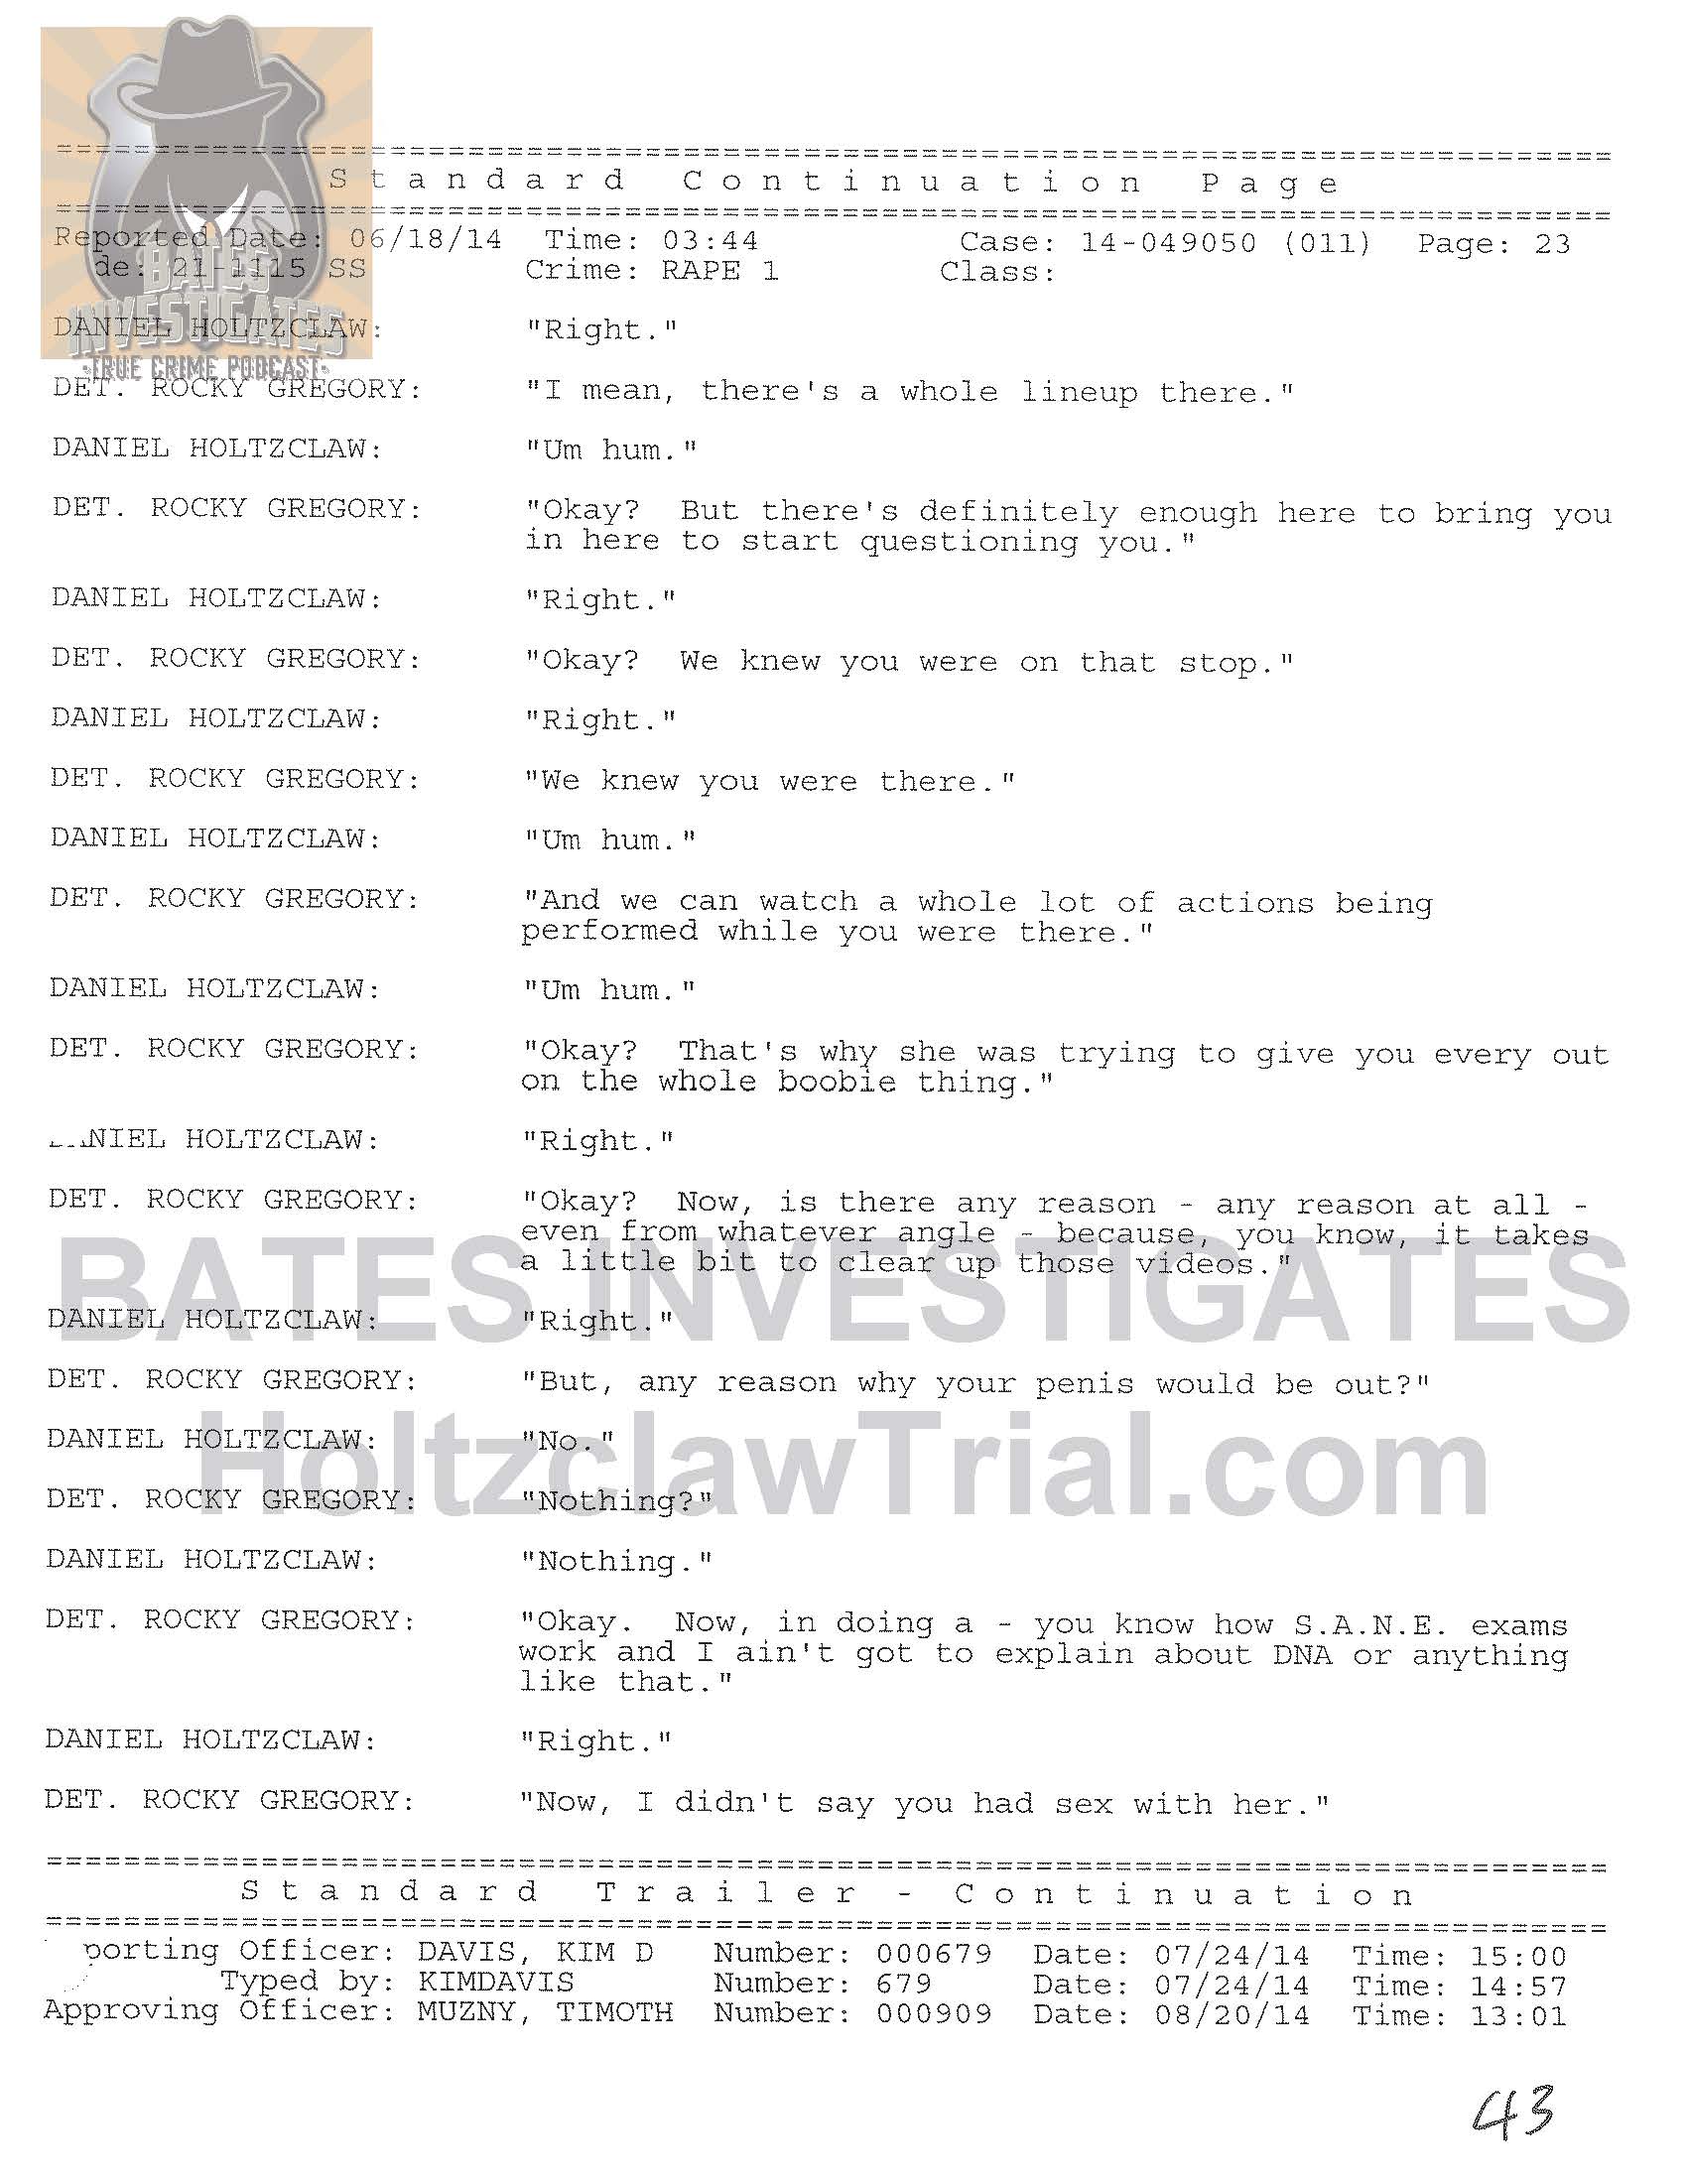 Holtzclaw Interrogation Transcript - Ep02 Redacted_Page_23.jpg